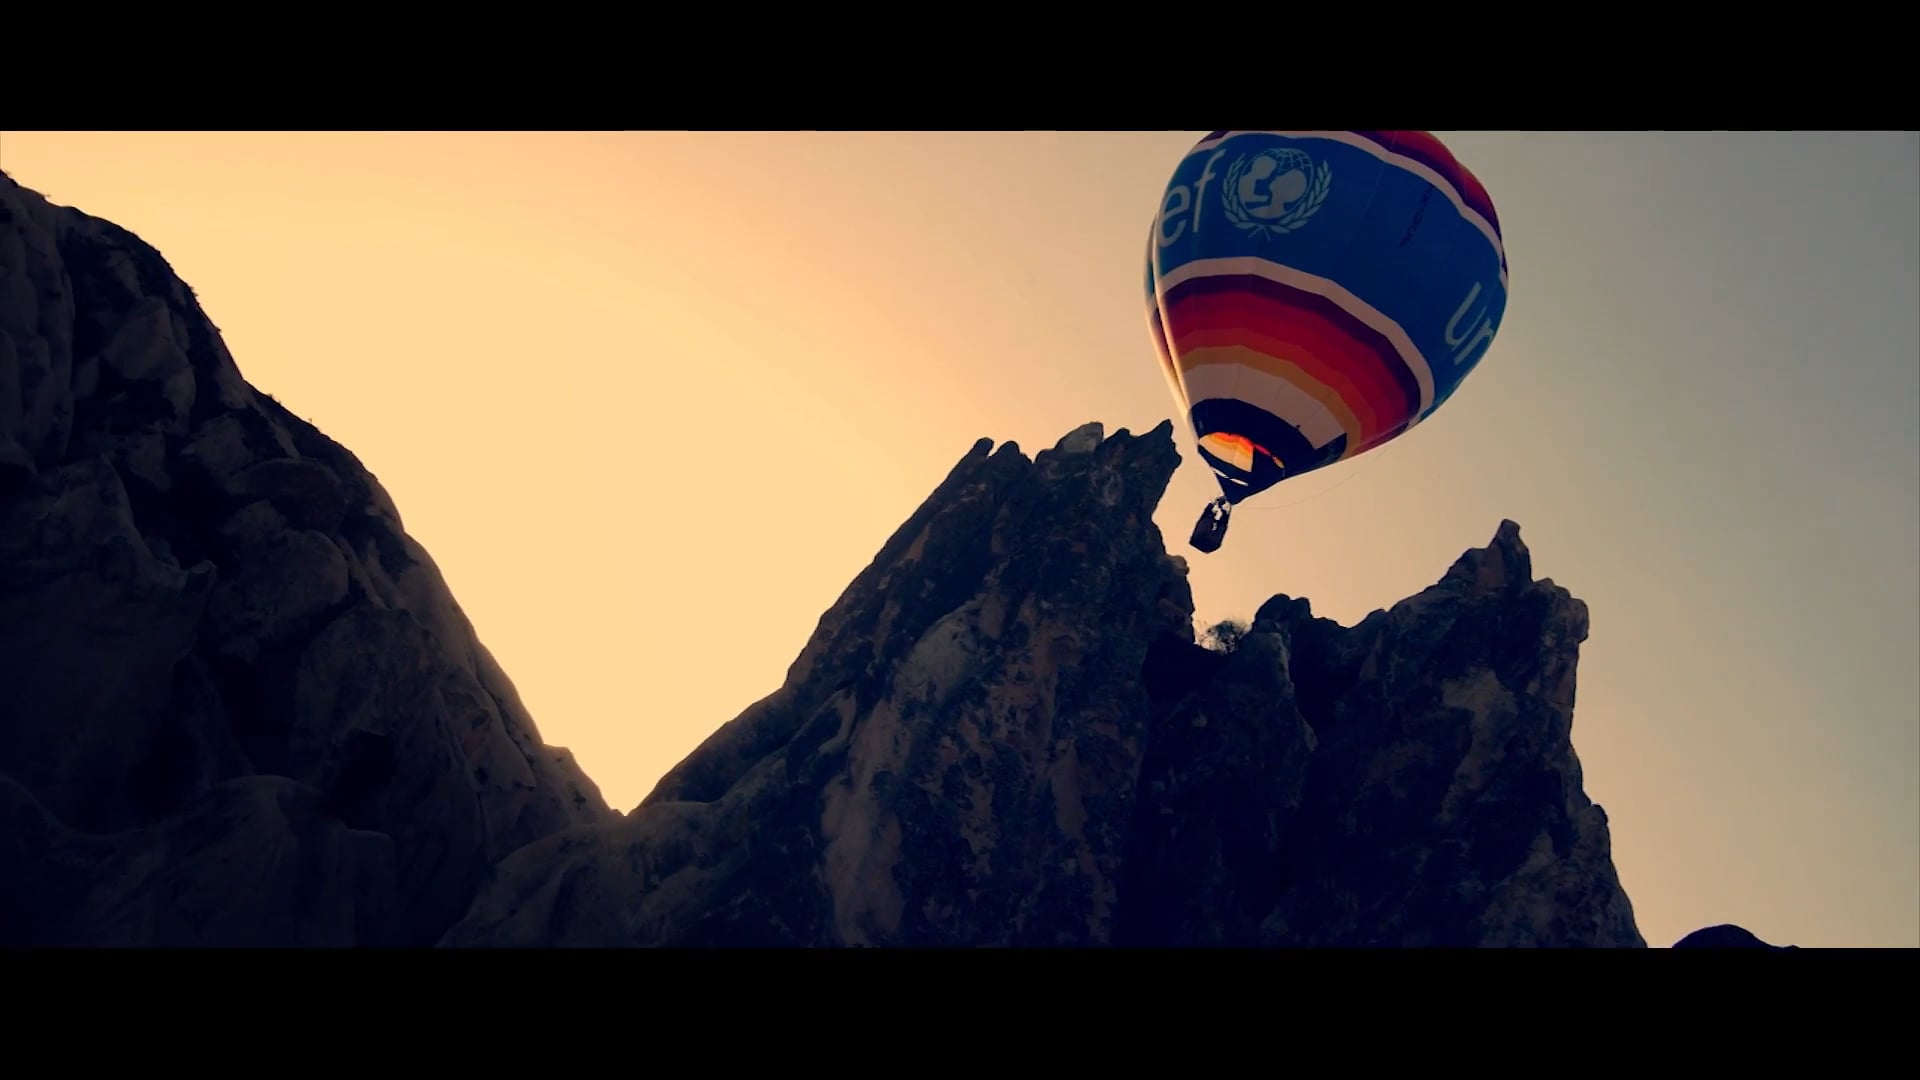 UNICEF - The ” Flying High for Kids Balloon Project” / Director’s Cut